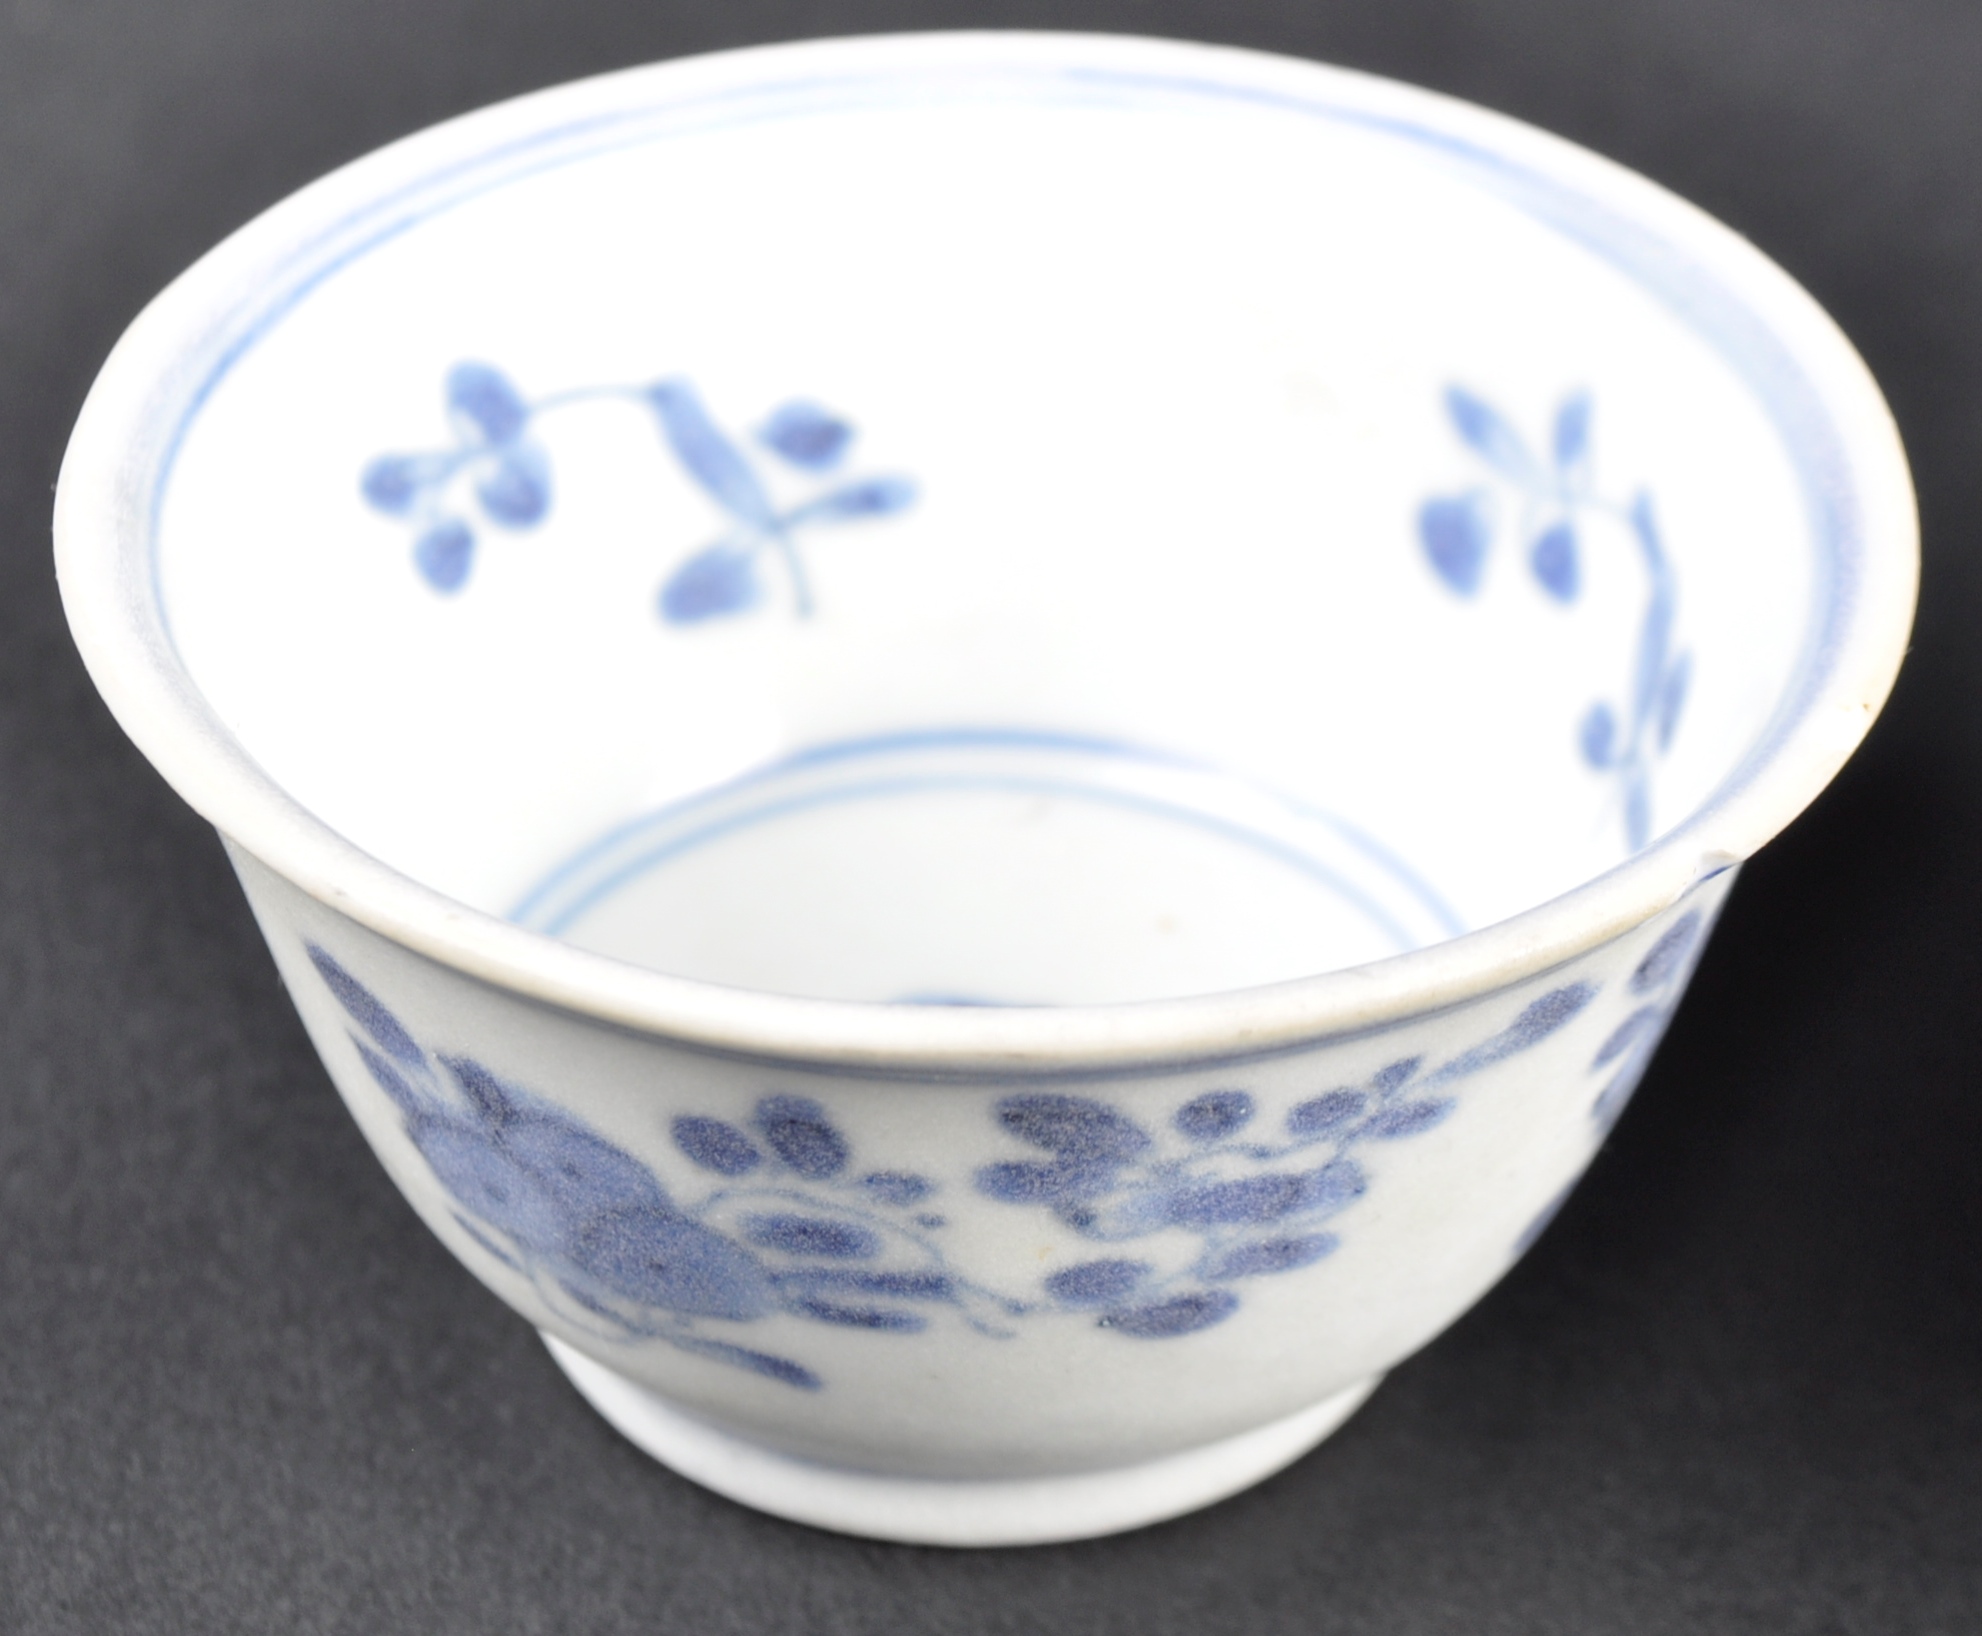 COLLECTION OF 17TH CENTURY CHINESE MING DYNASTY PORCELAIN - Image 3 of 8